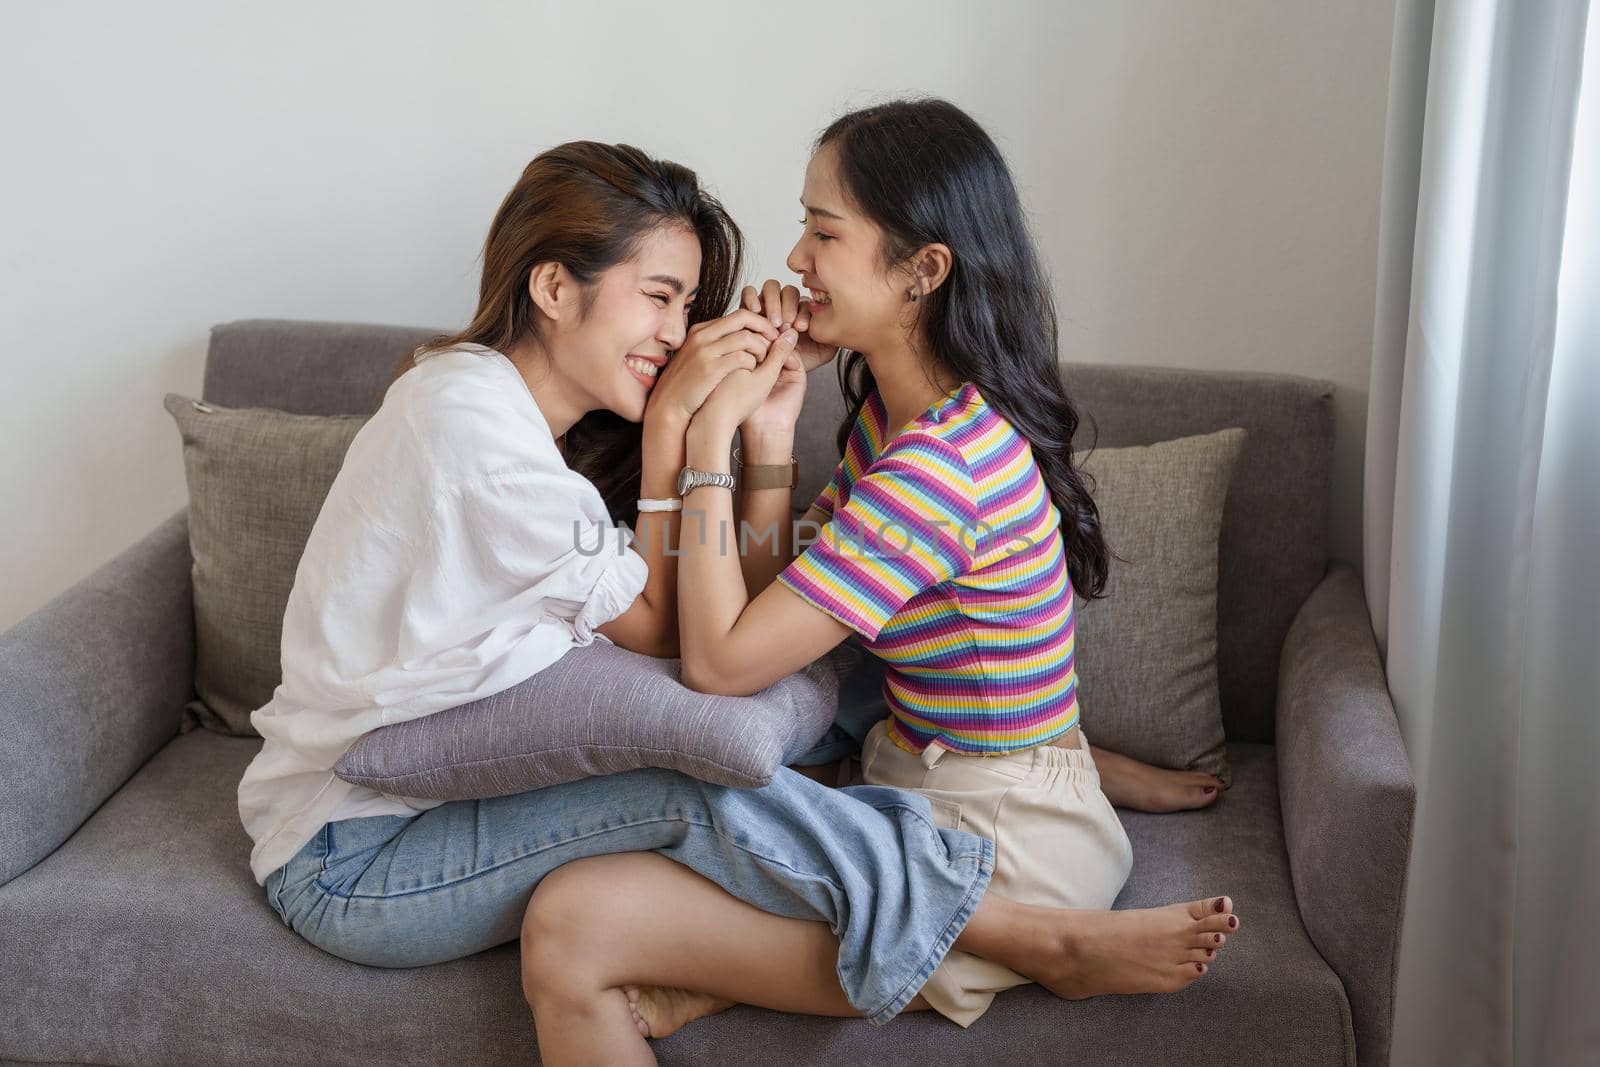 lgbtq, lgbt concept, homosexuality, portrait of two Asian women posing happy together and showing love for each other while being together.